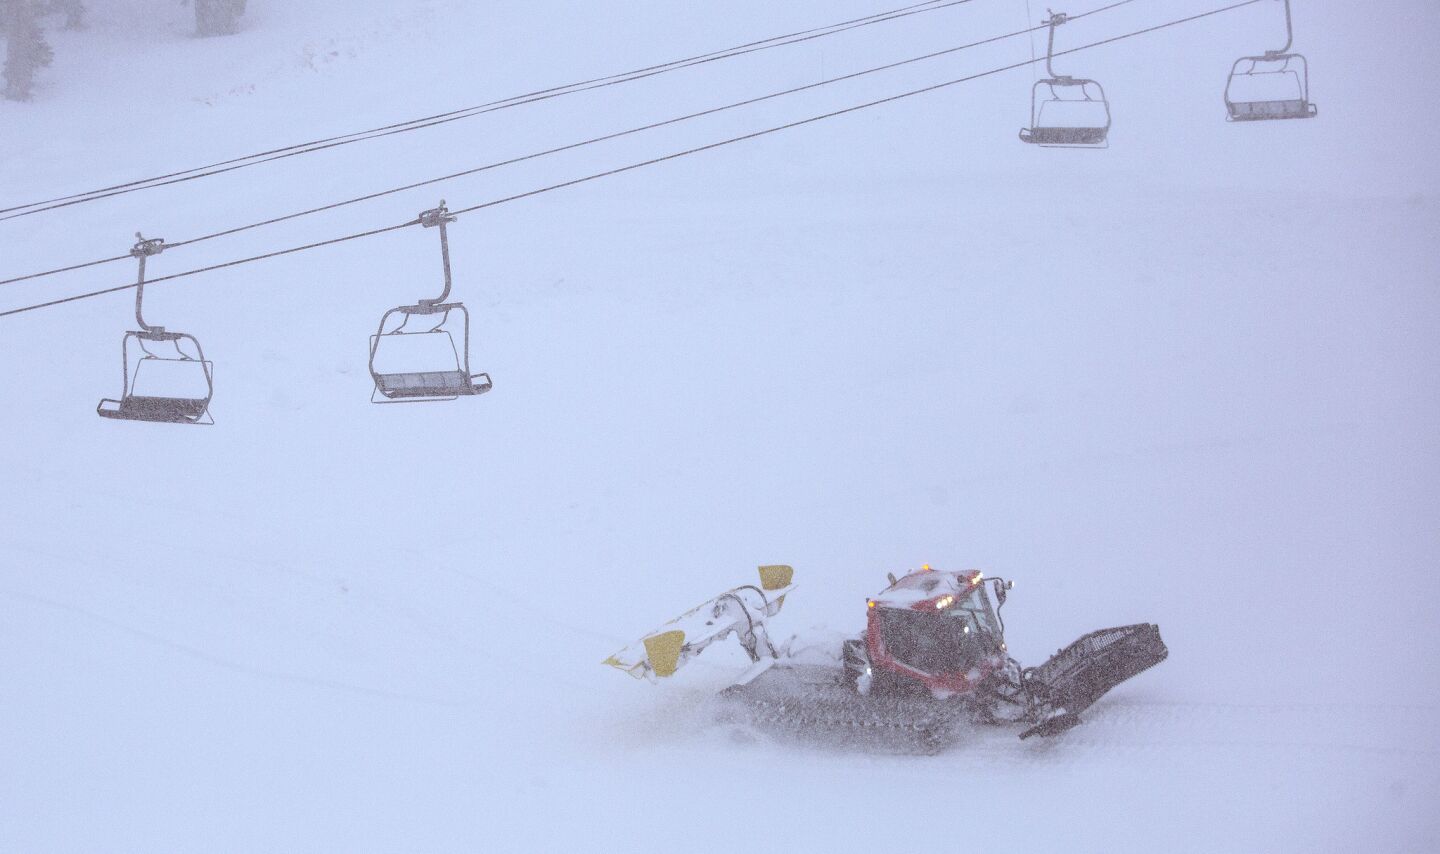 A snowcat moves snow in near whiteout conditions on the slopes at Mammoth Mountain.